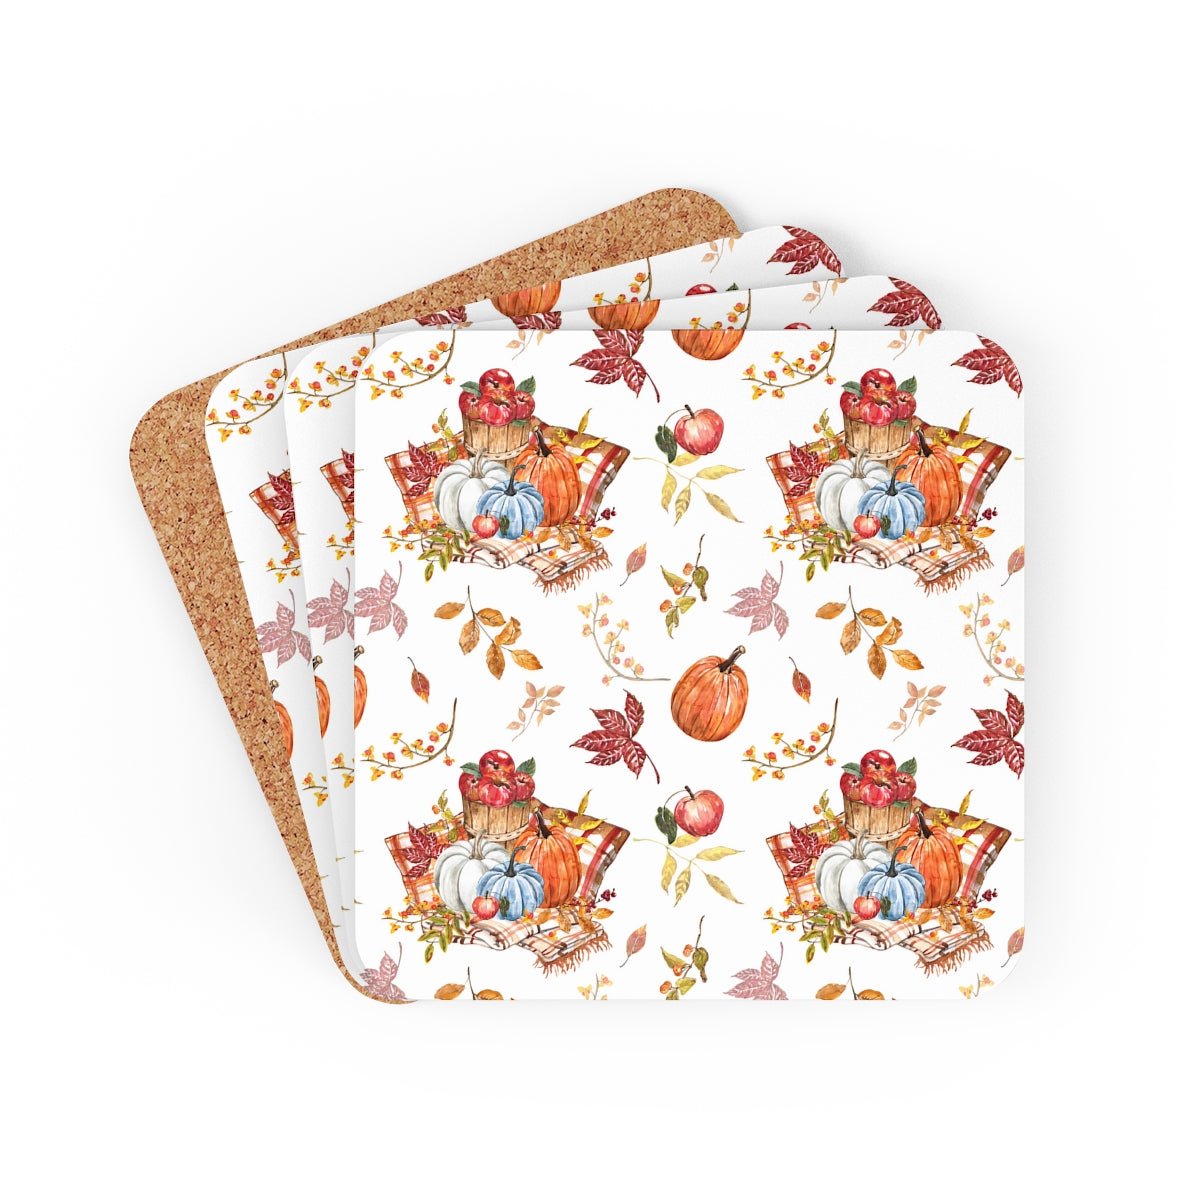 Fall Pumpkins and Apples Corkwood Coaster Set - Puffin Lime